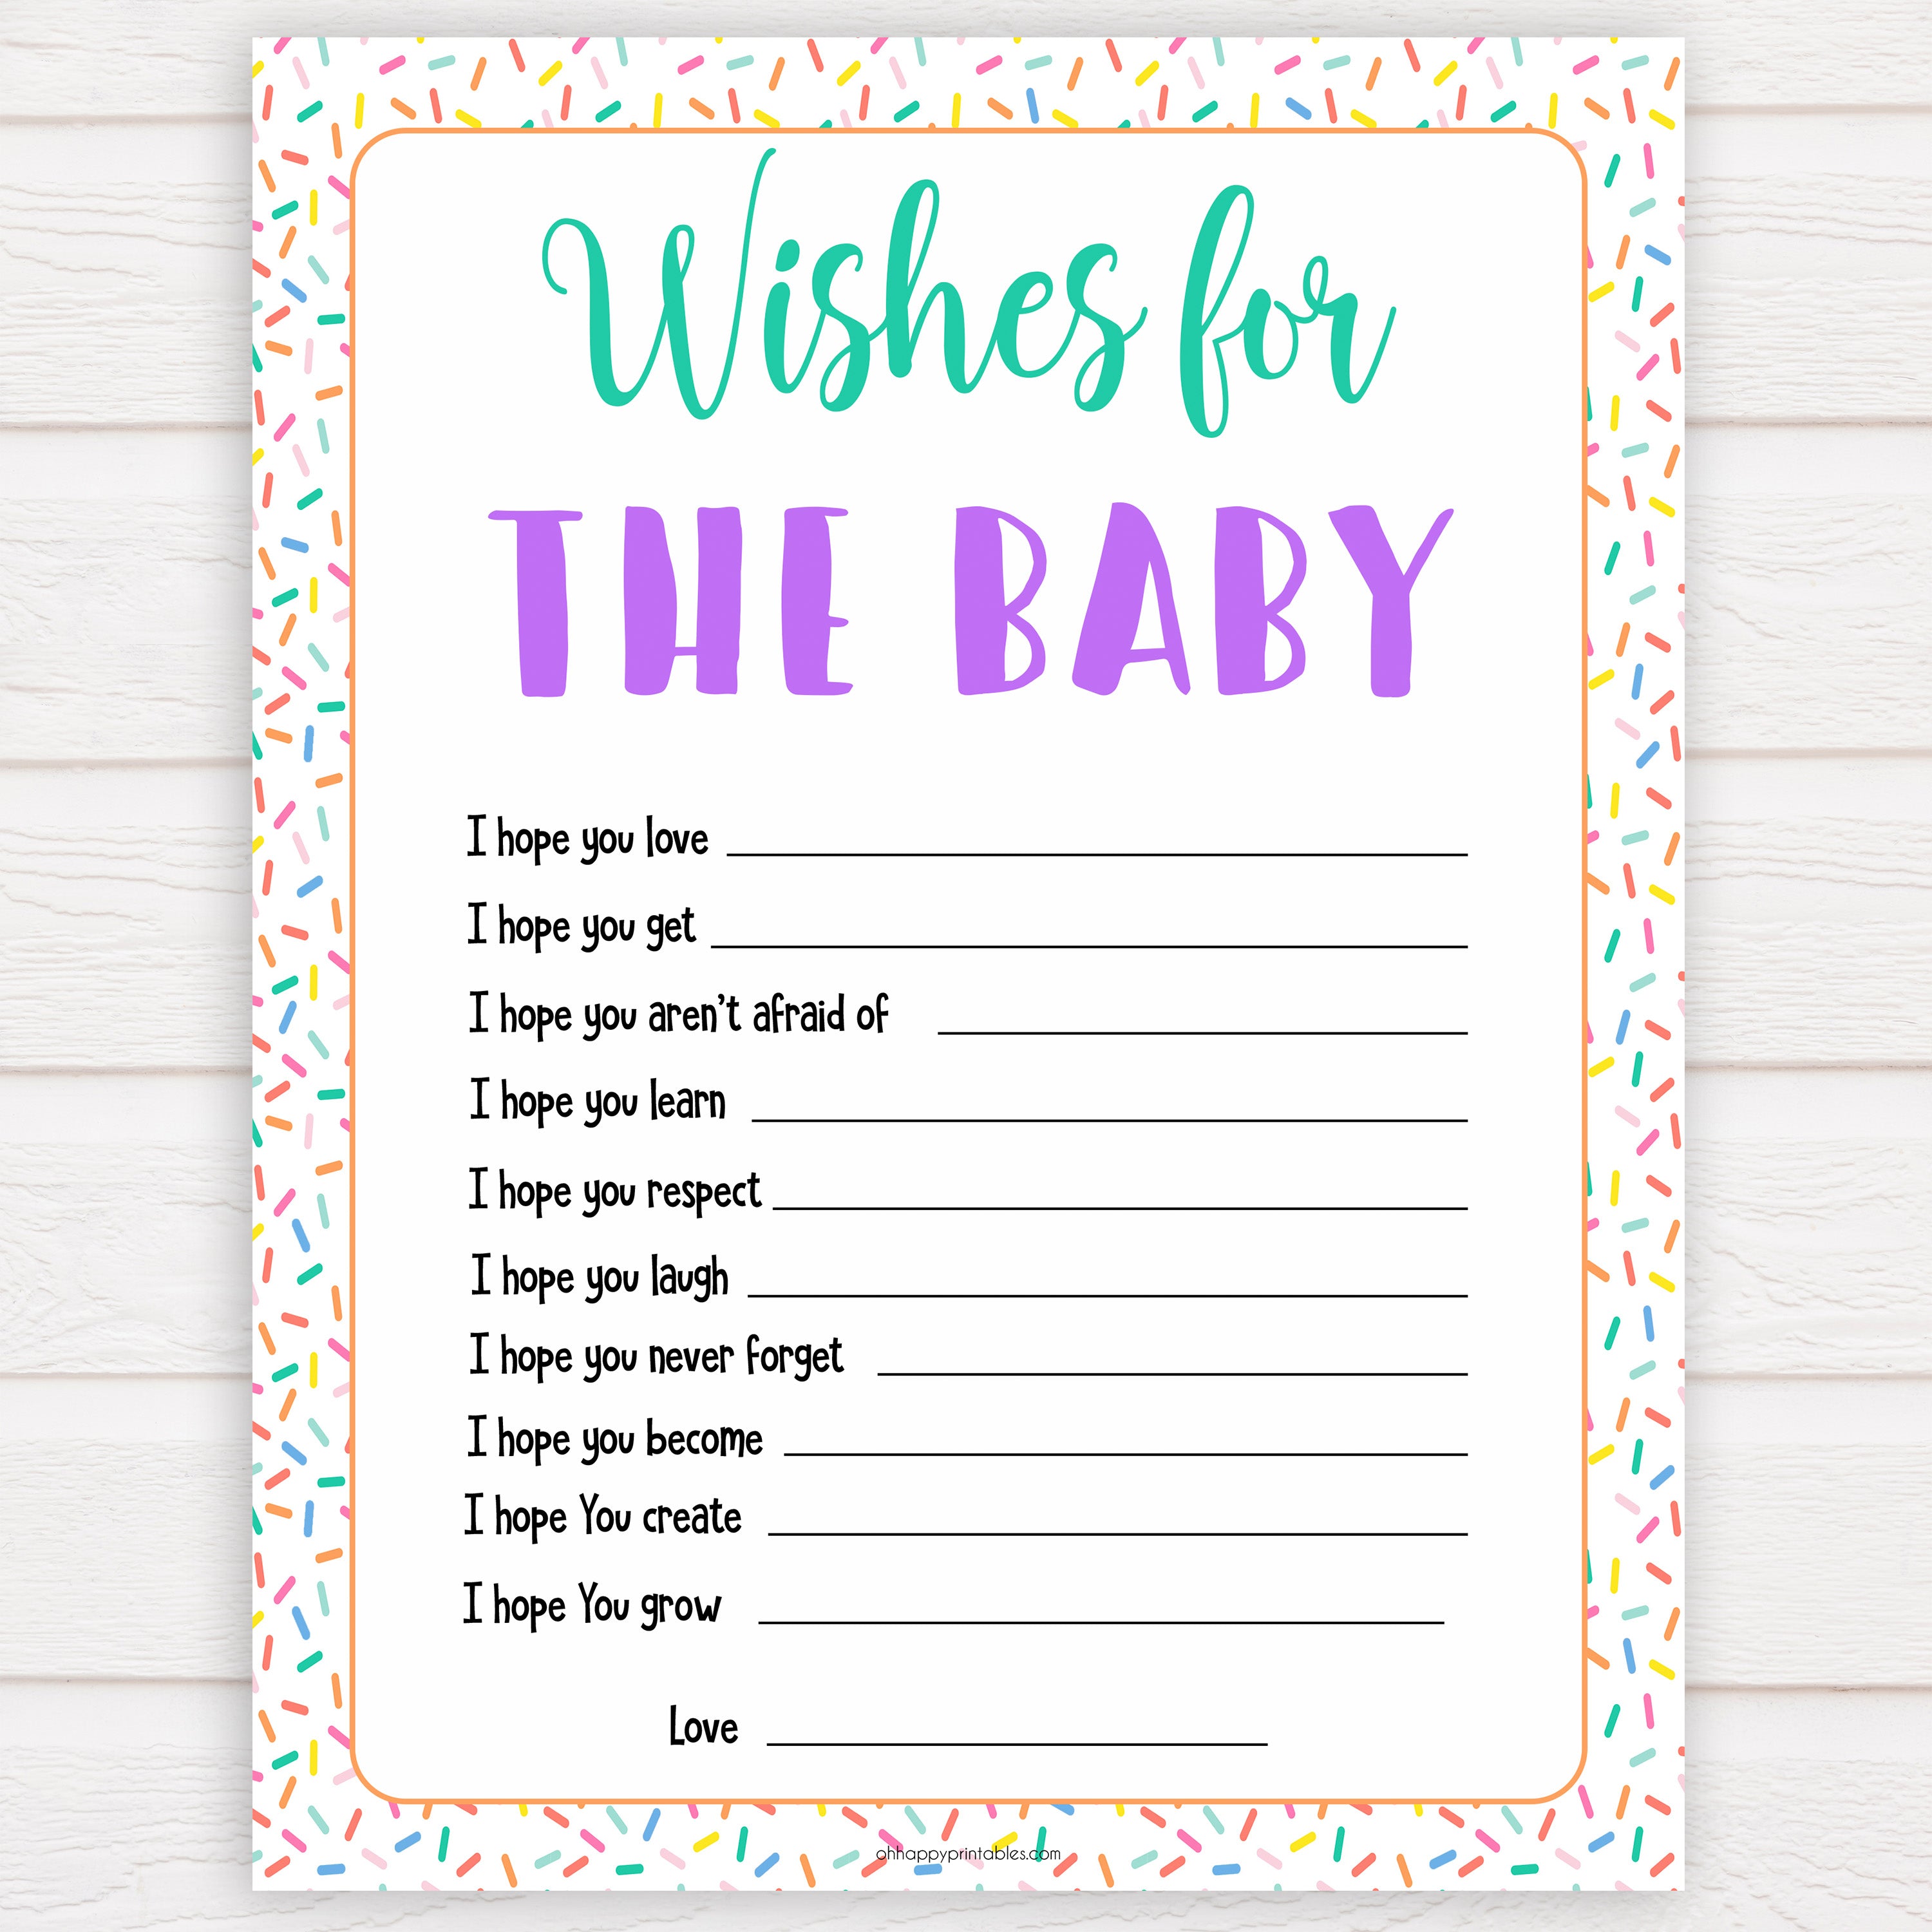 wishes for the baby, Printable baby shower games, baby sprinkle fun baby games, baby shower games, fun baby shower ideas, top baby shower ideas, sprinkle shower baby shower, friends baby shower ideas